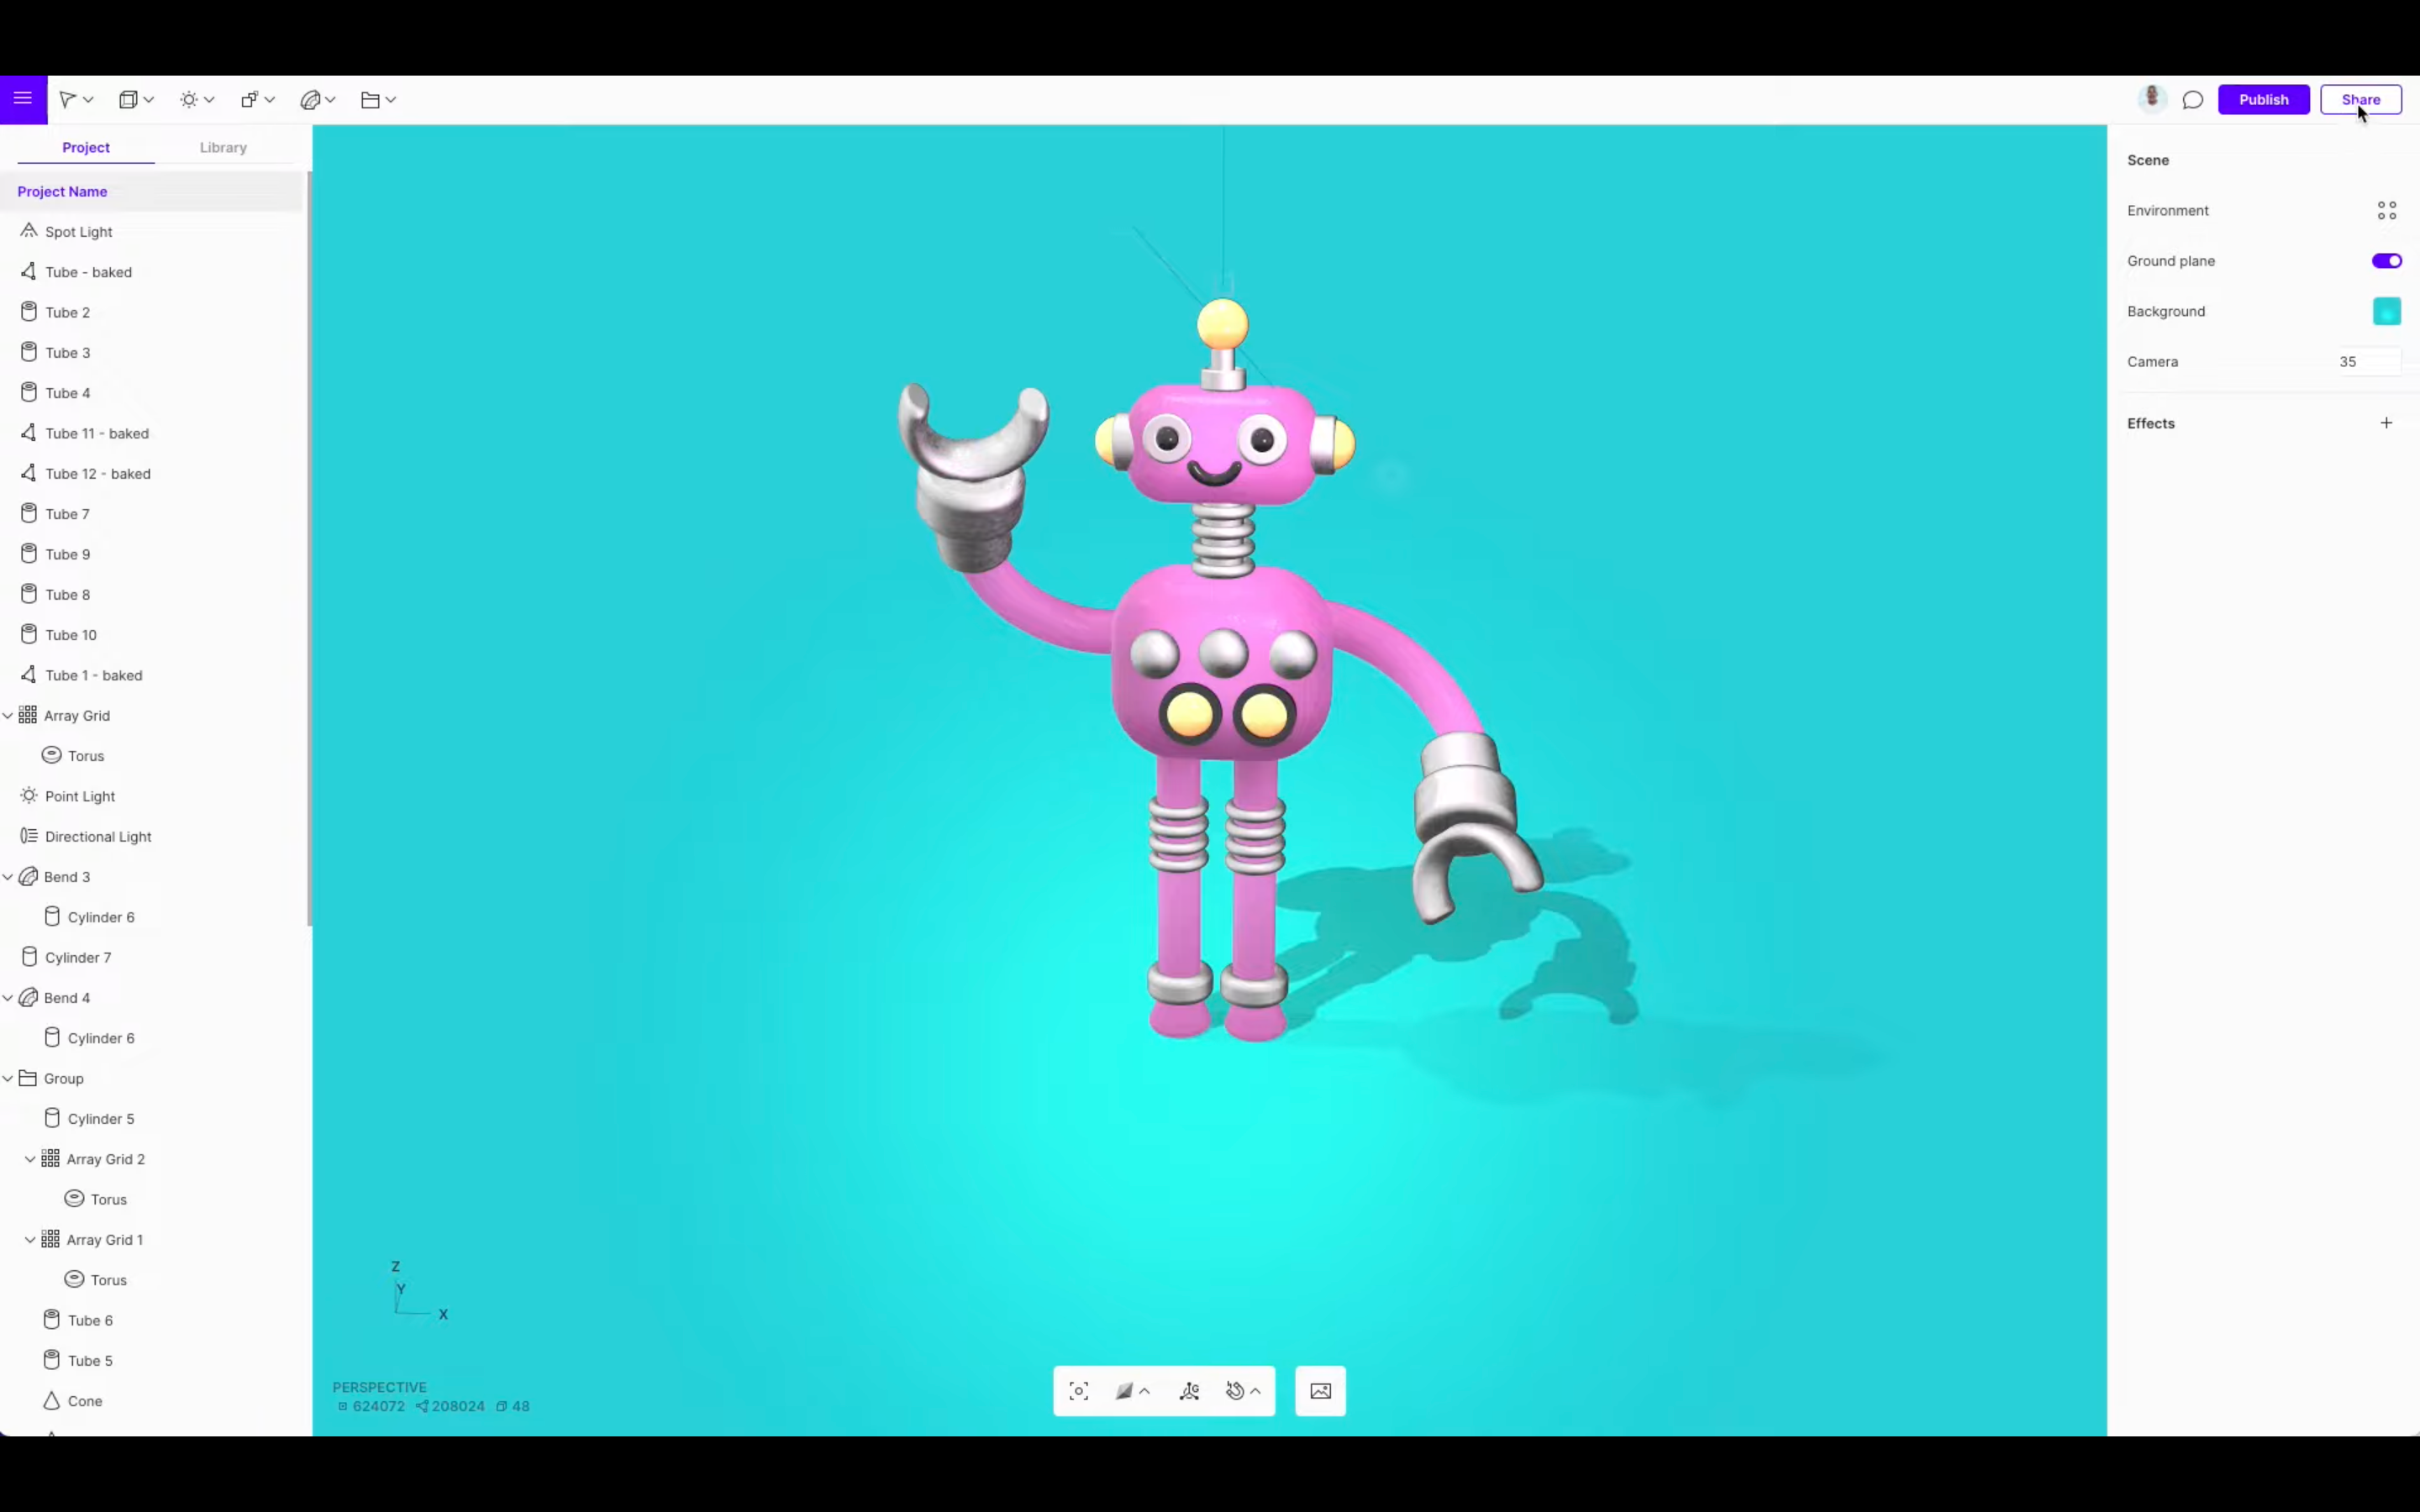 Creating simple robot design in Vectary (Source: https://www.youtube.com/watch?v=AZWHbq6IaYs)